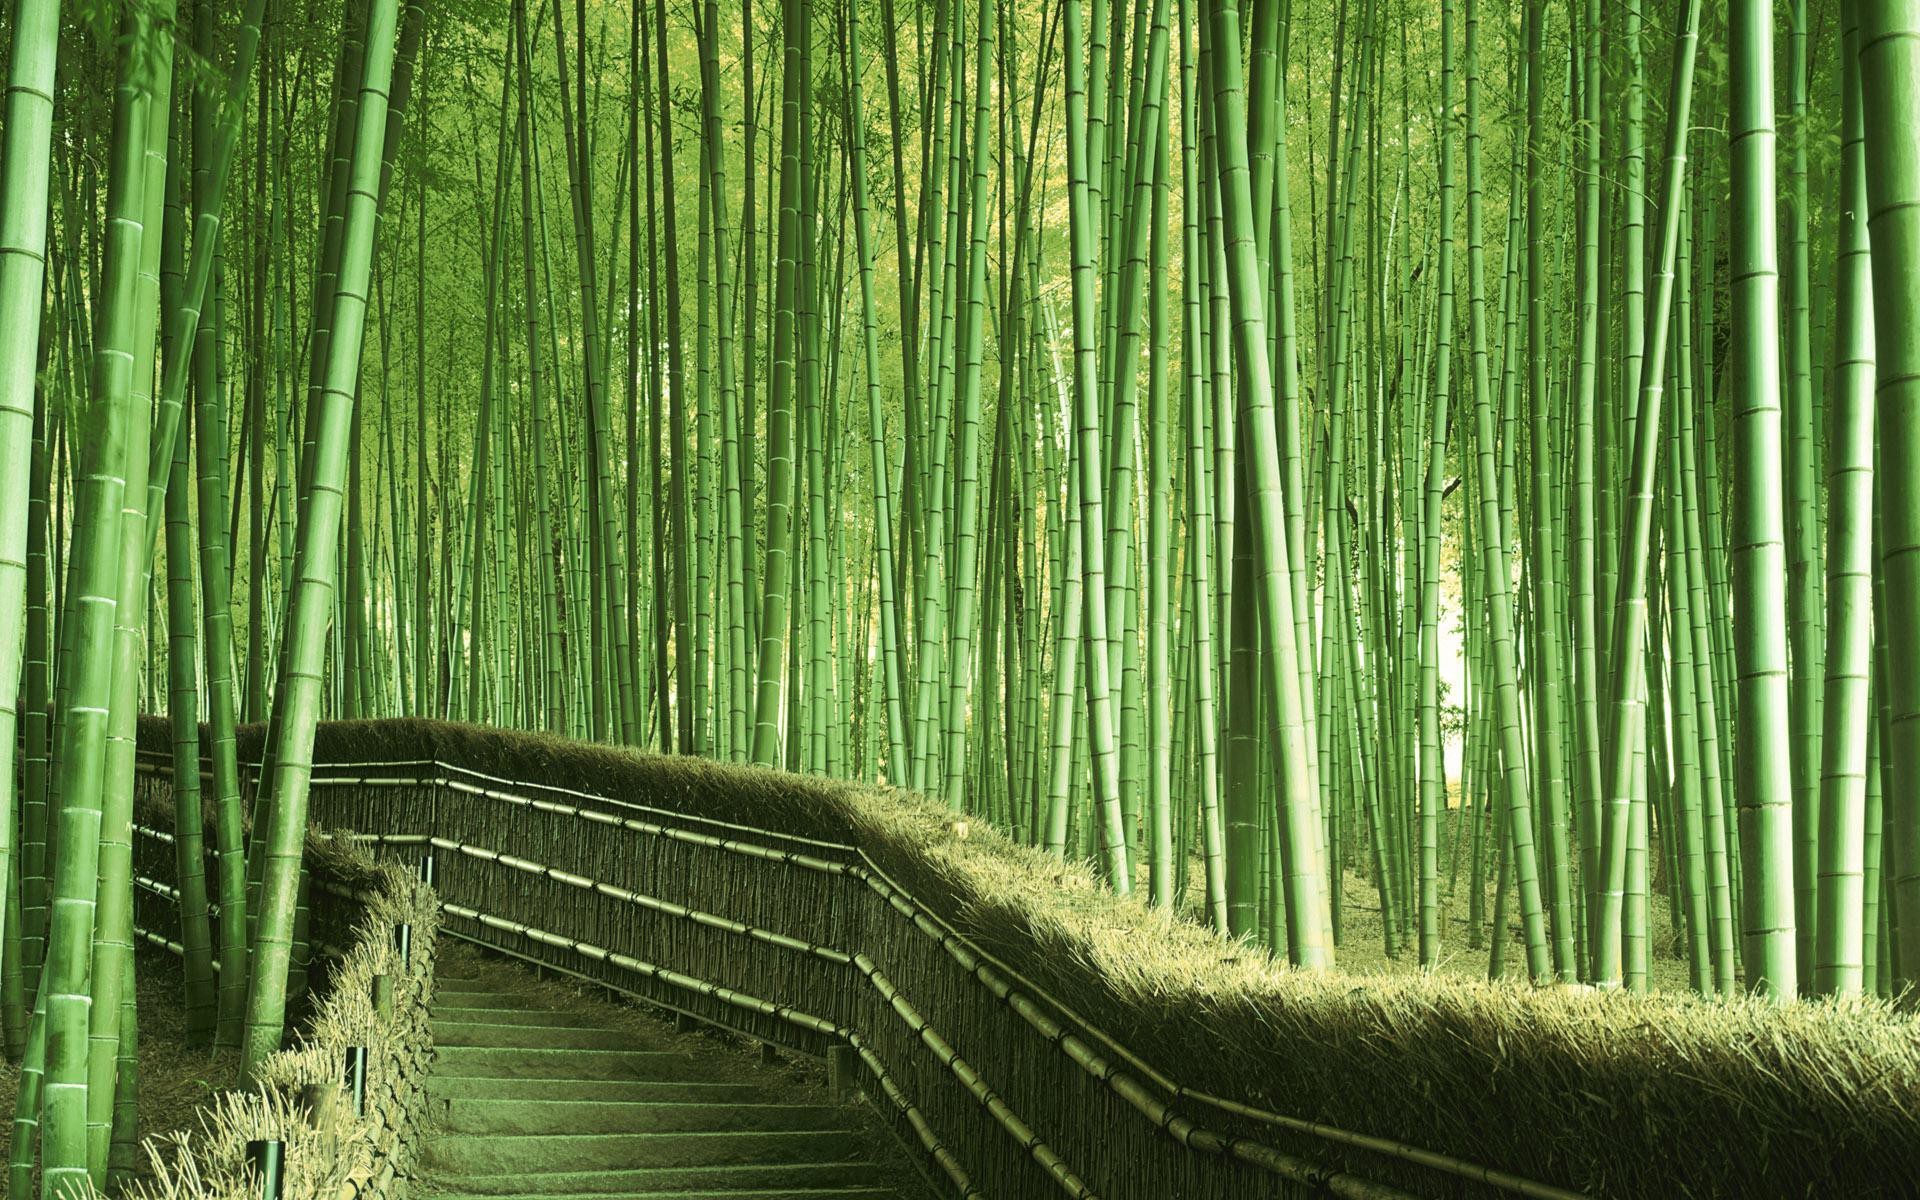 1920x1200 HD Bamboo High Quality Wide Desktop Wallpaper For Background Free